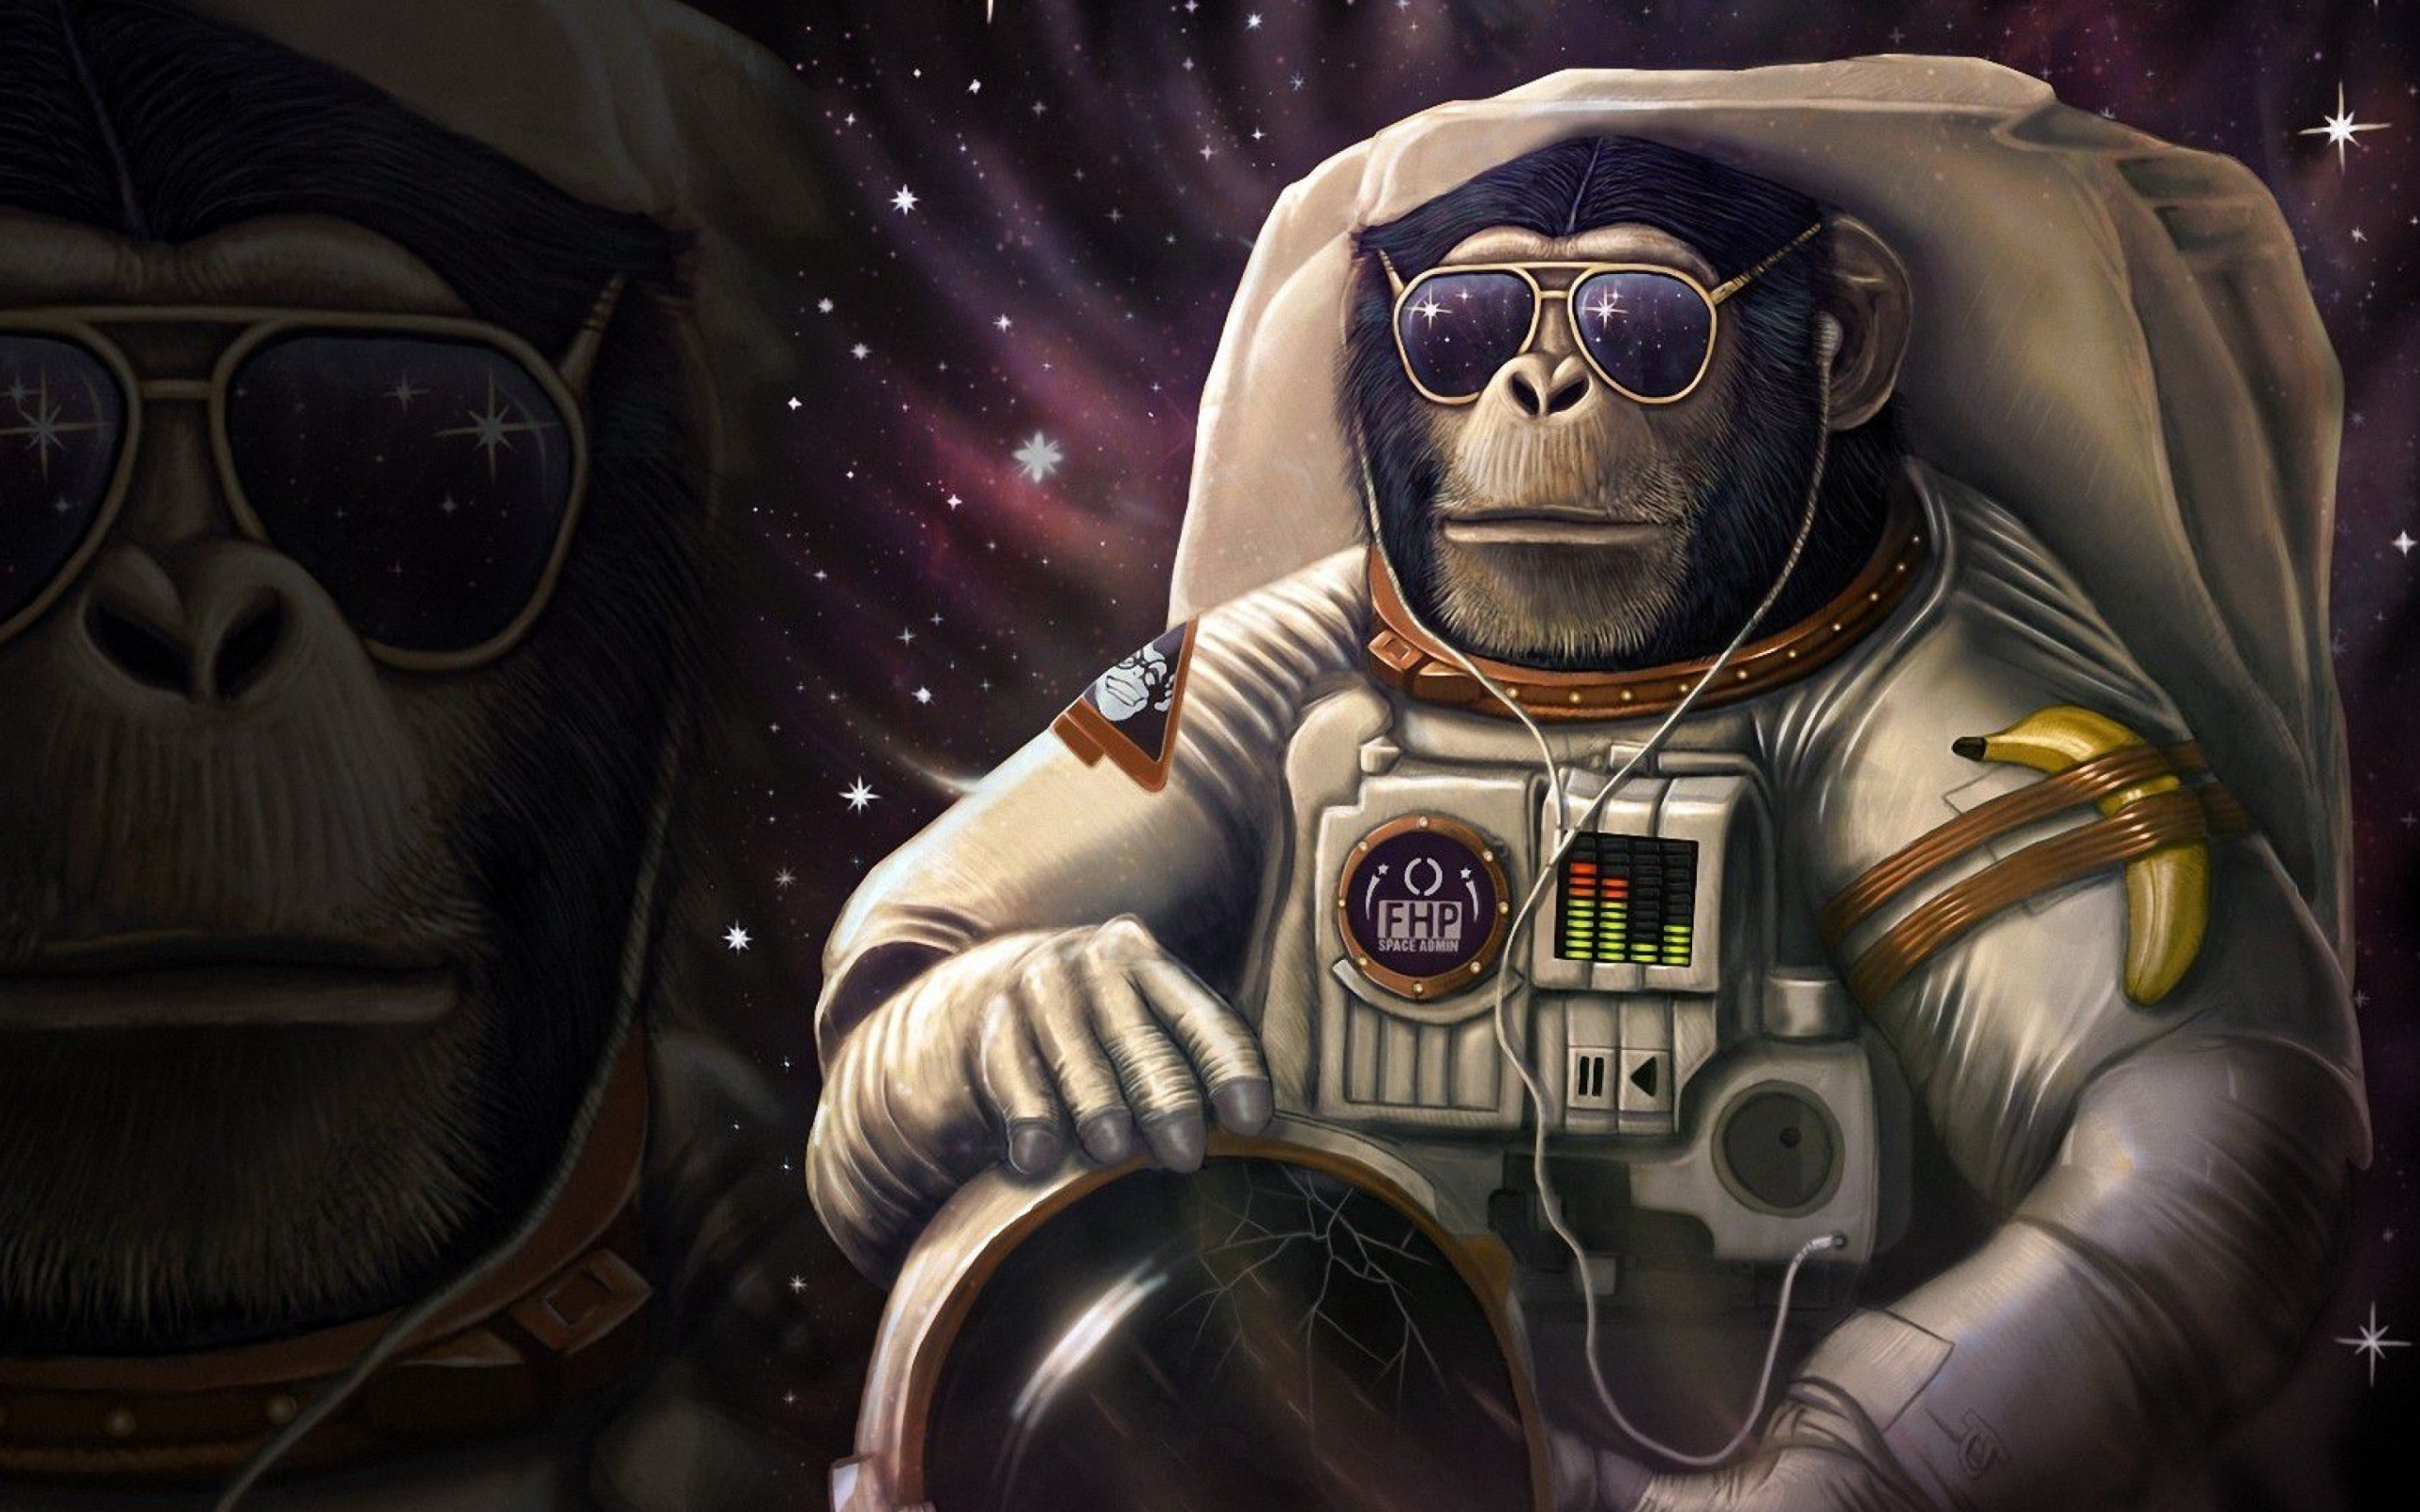 Monkeys and apes in space wallpaper 2560x1600